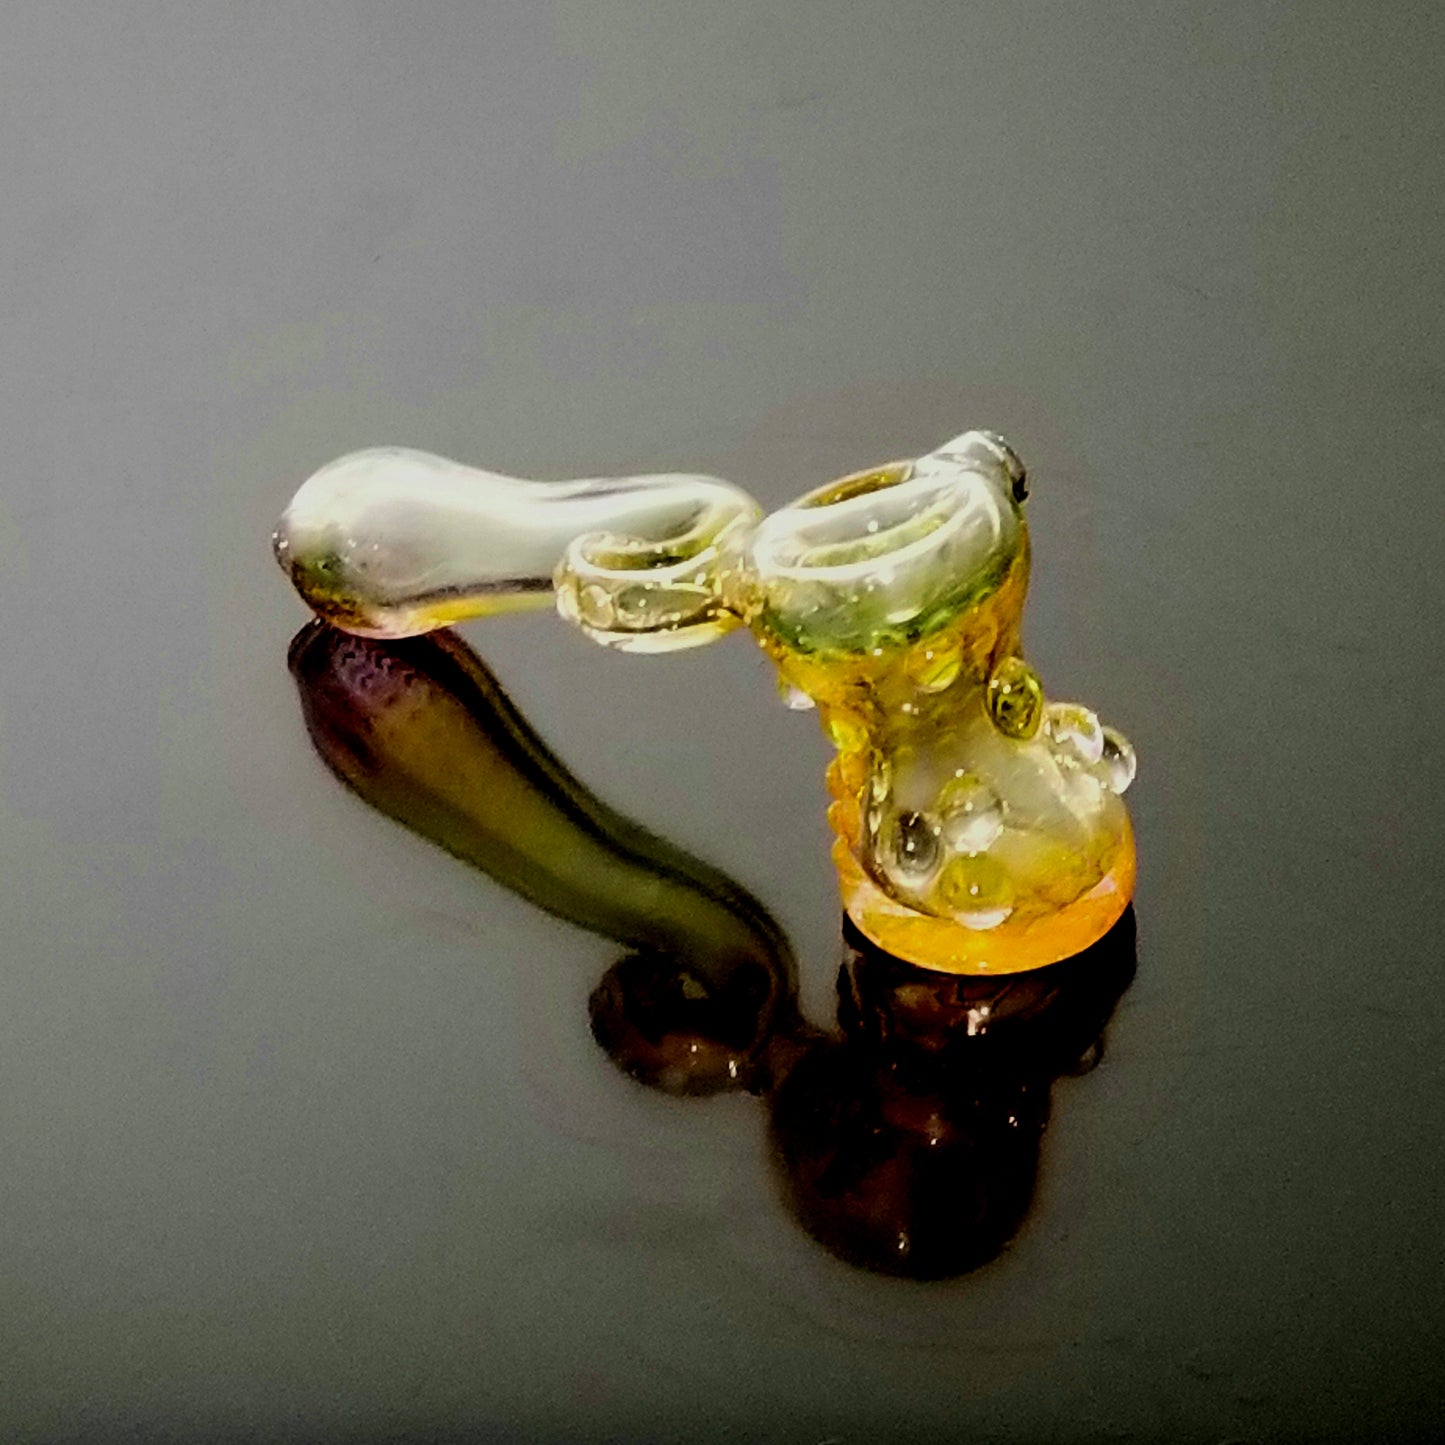 Fumed Hammer Pipe by Ck_glass